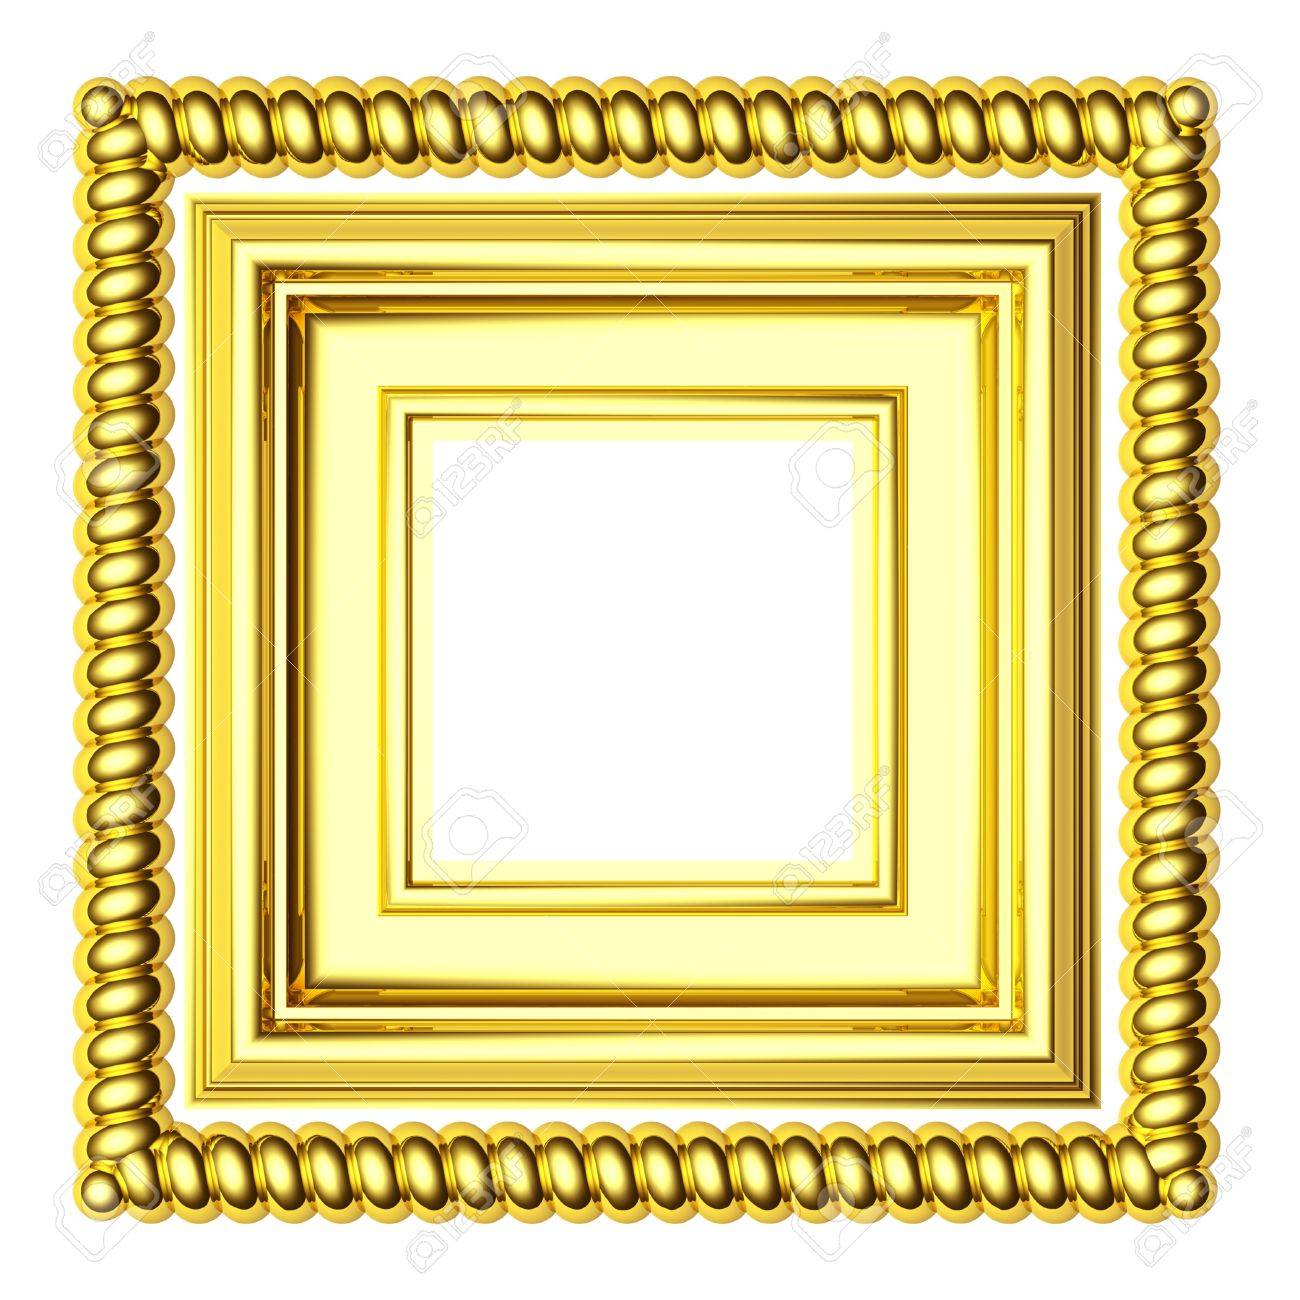 3d Gold Frame The Sculptural Form On A White Background Stock